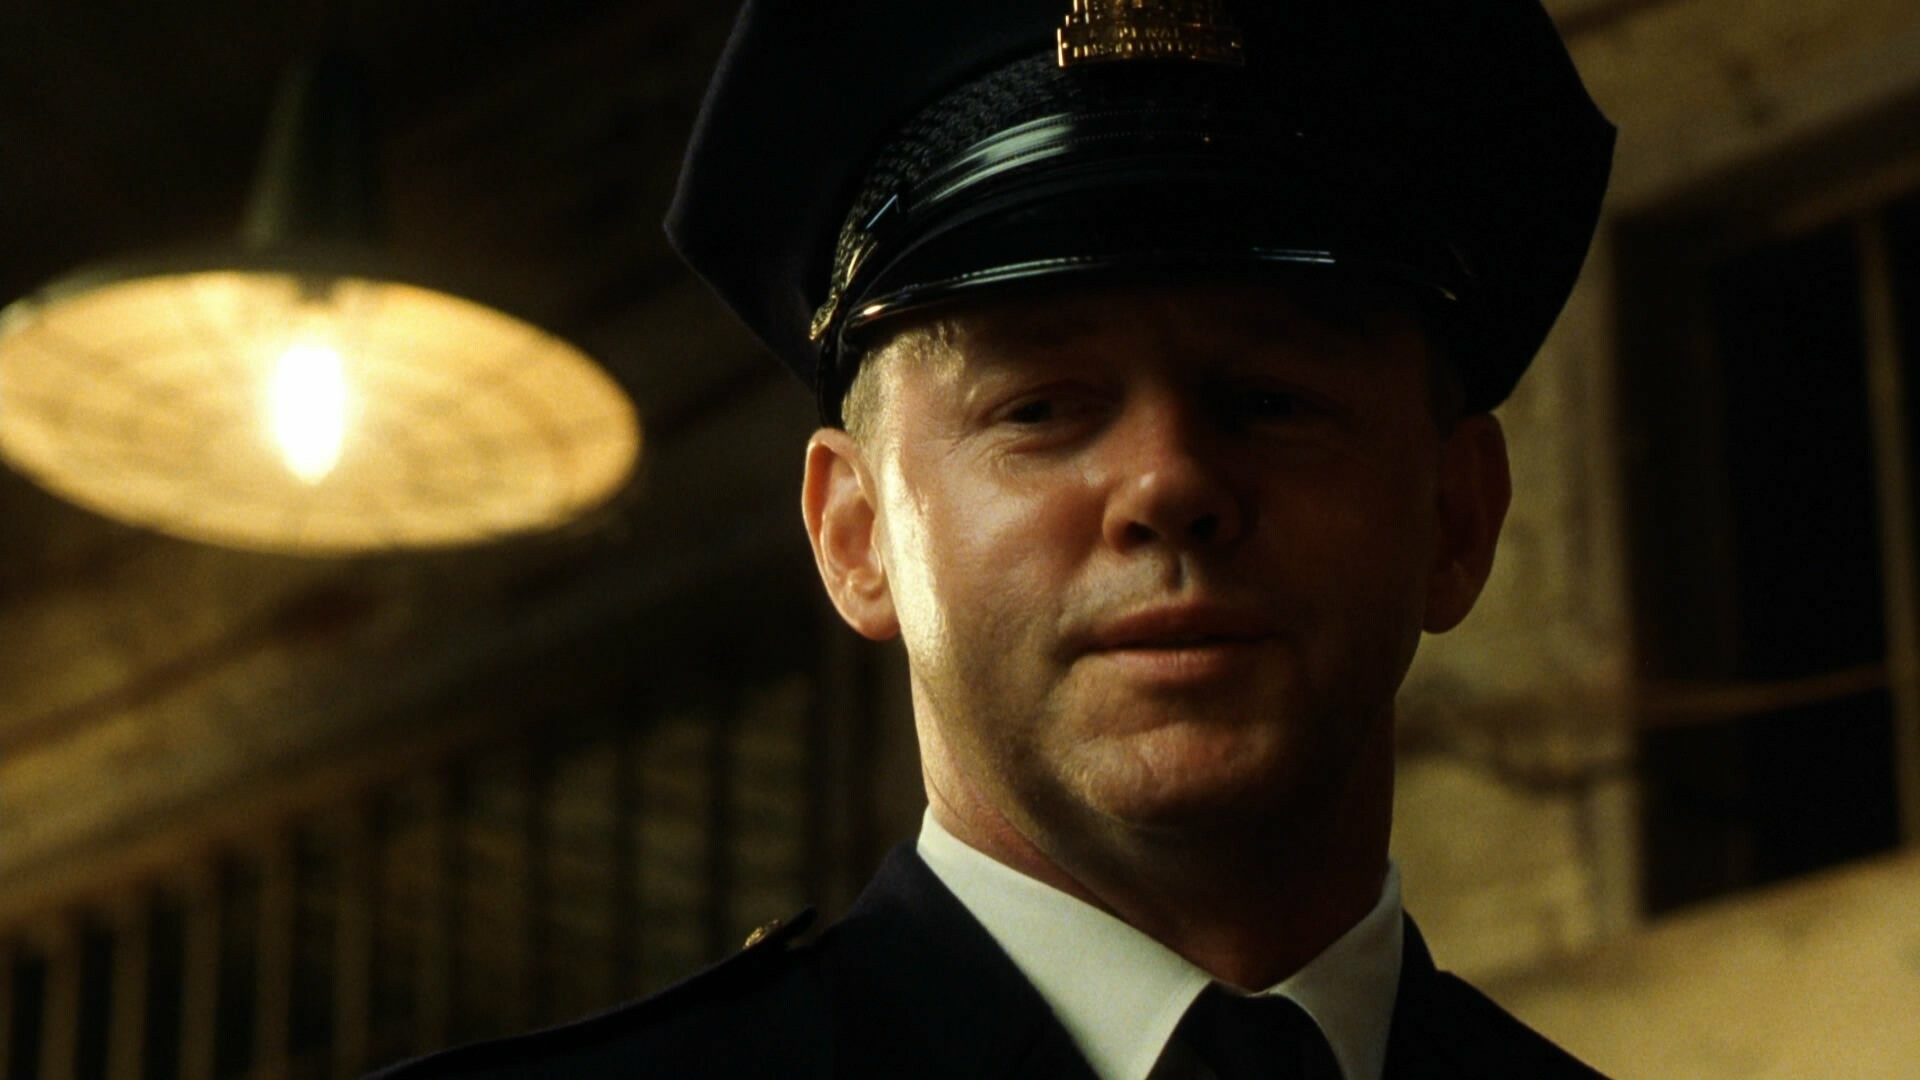 The Green Mile: David Morse as Brutus "Brutal" Howell, A 1999 American film. 1920x1080 Full HD Wallpaper.